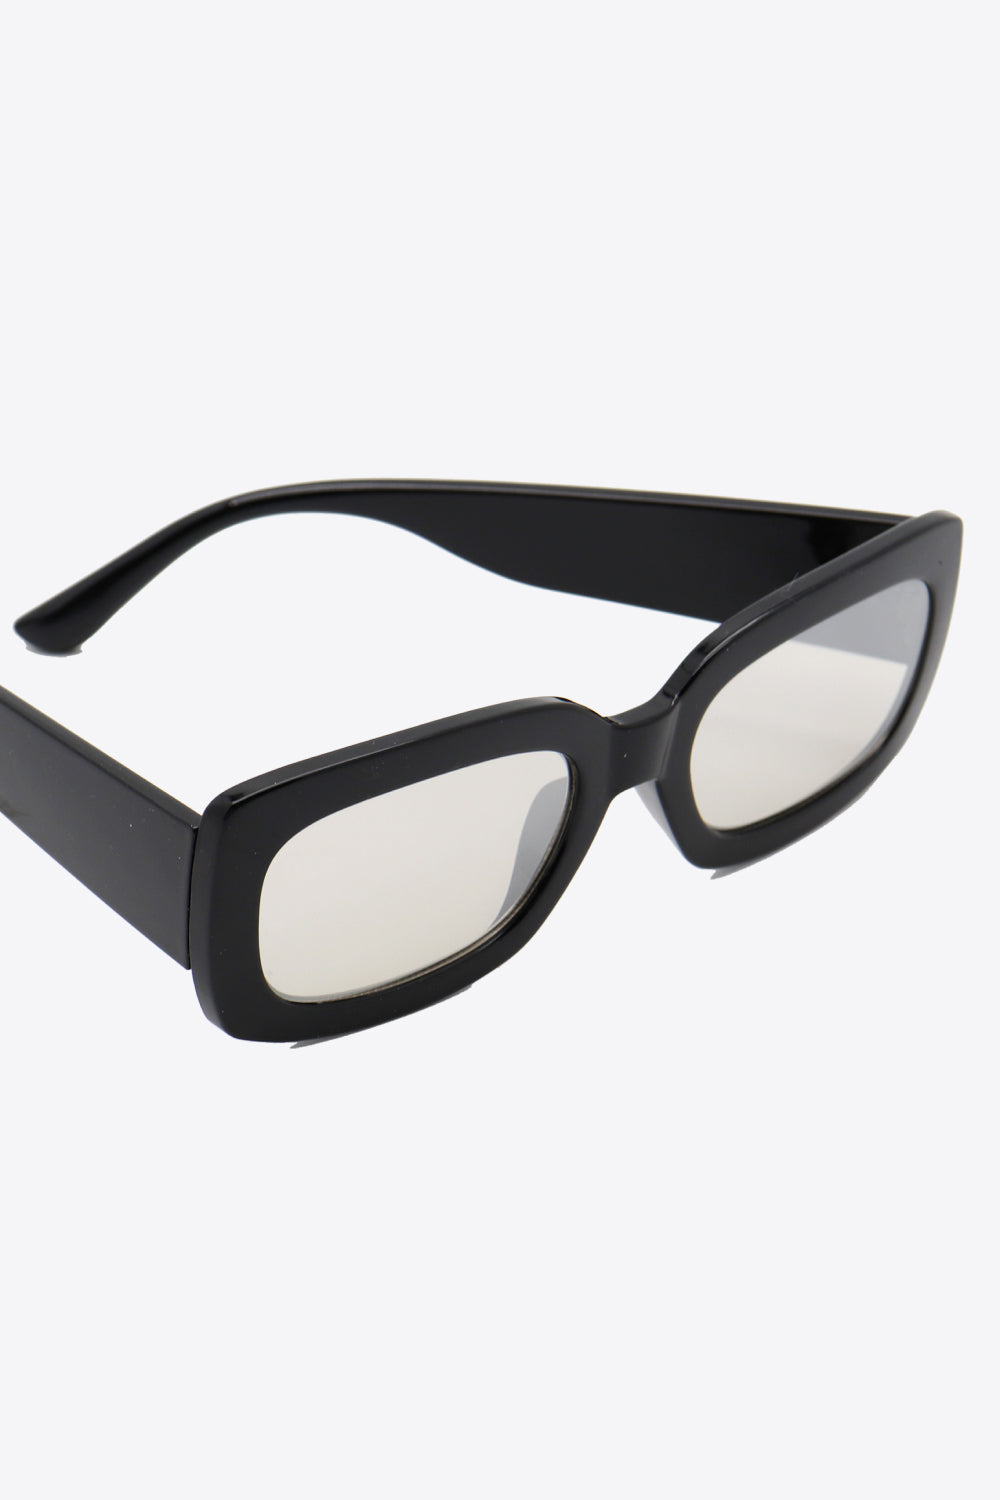 Polycarbonate Frame Rectangle Sunglasses Print on any thing USA/STOD clothes